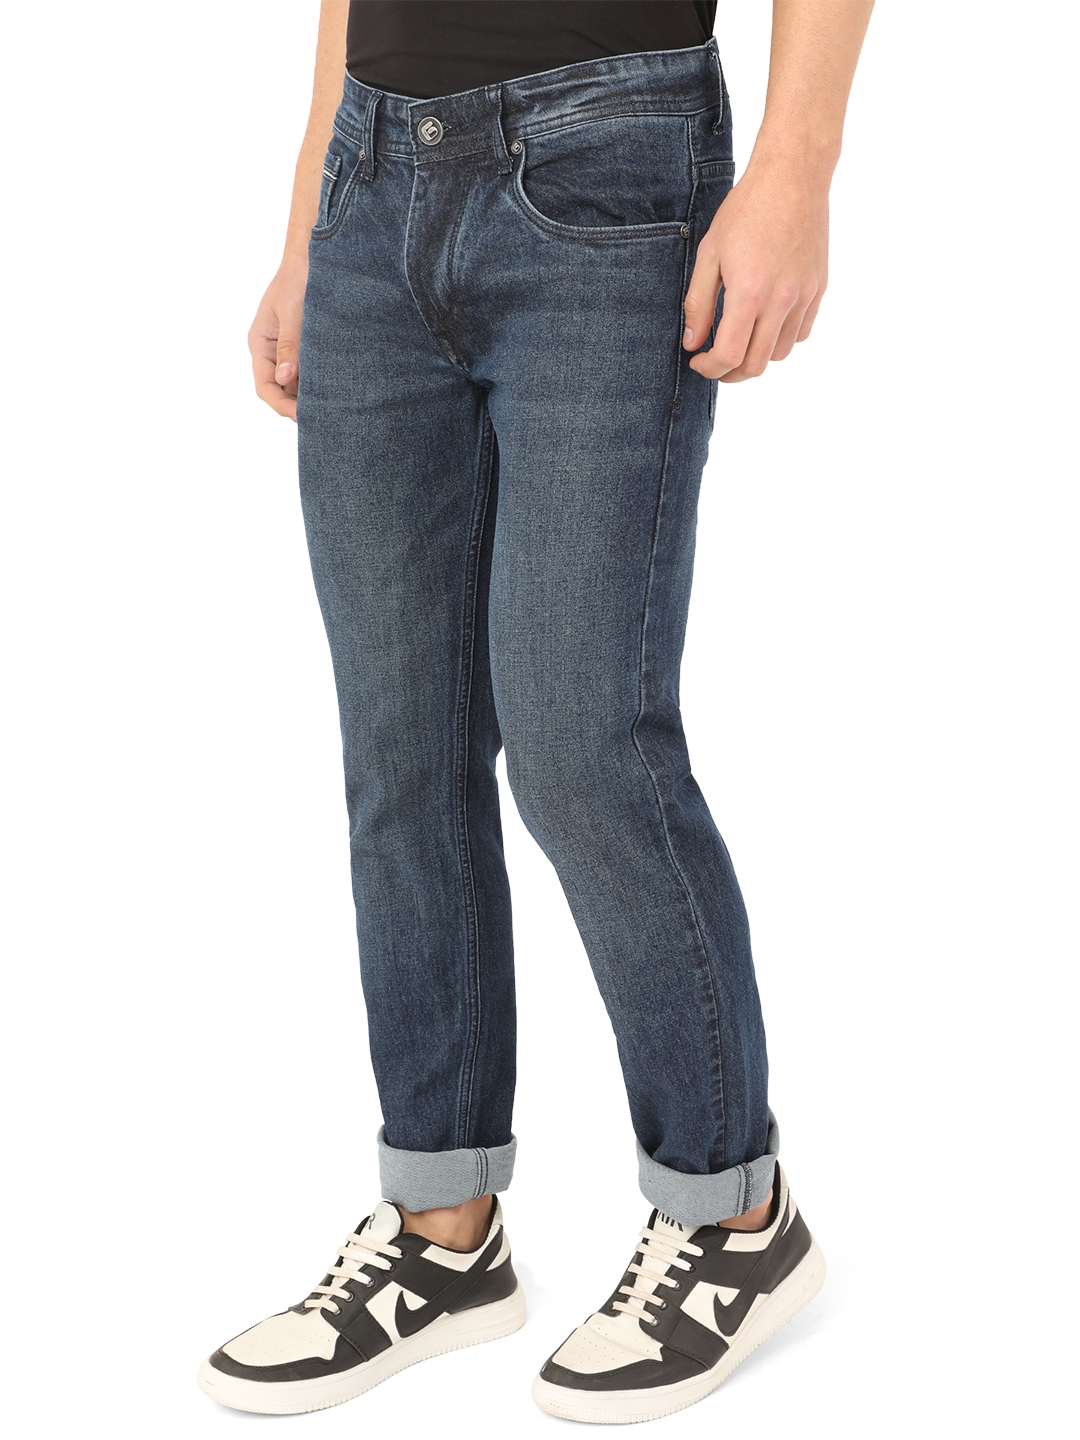 Greenfibre | Denim Blue Washed Narrow Fit Jeans | Greenfibre 1